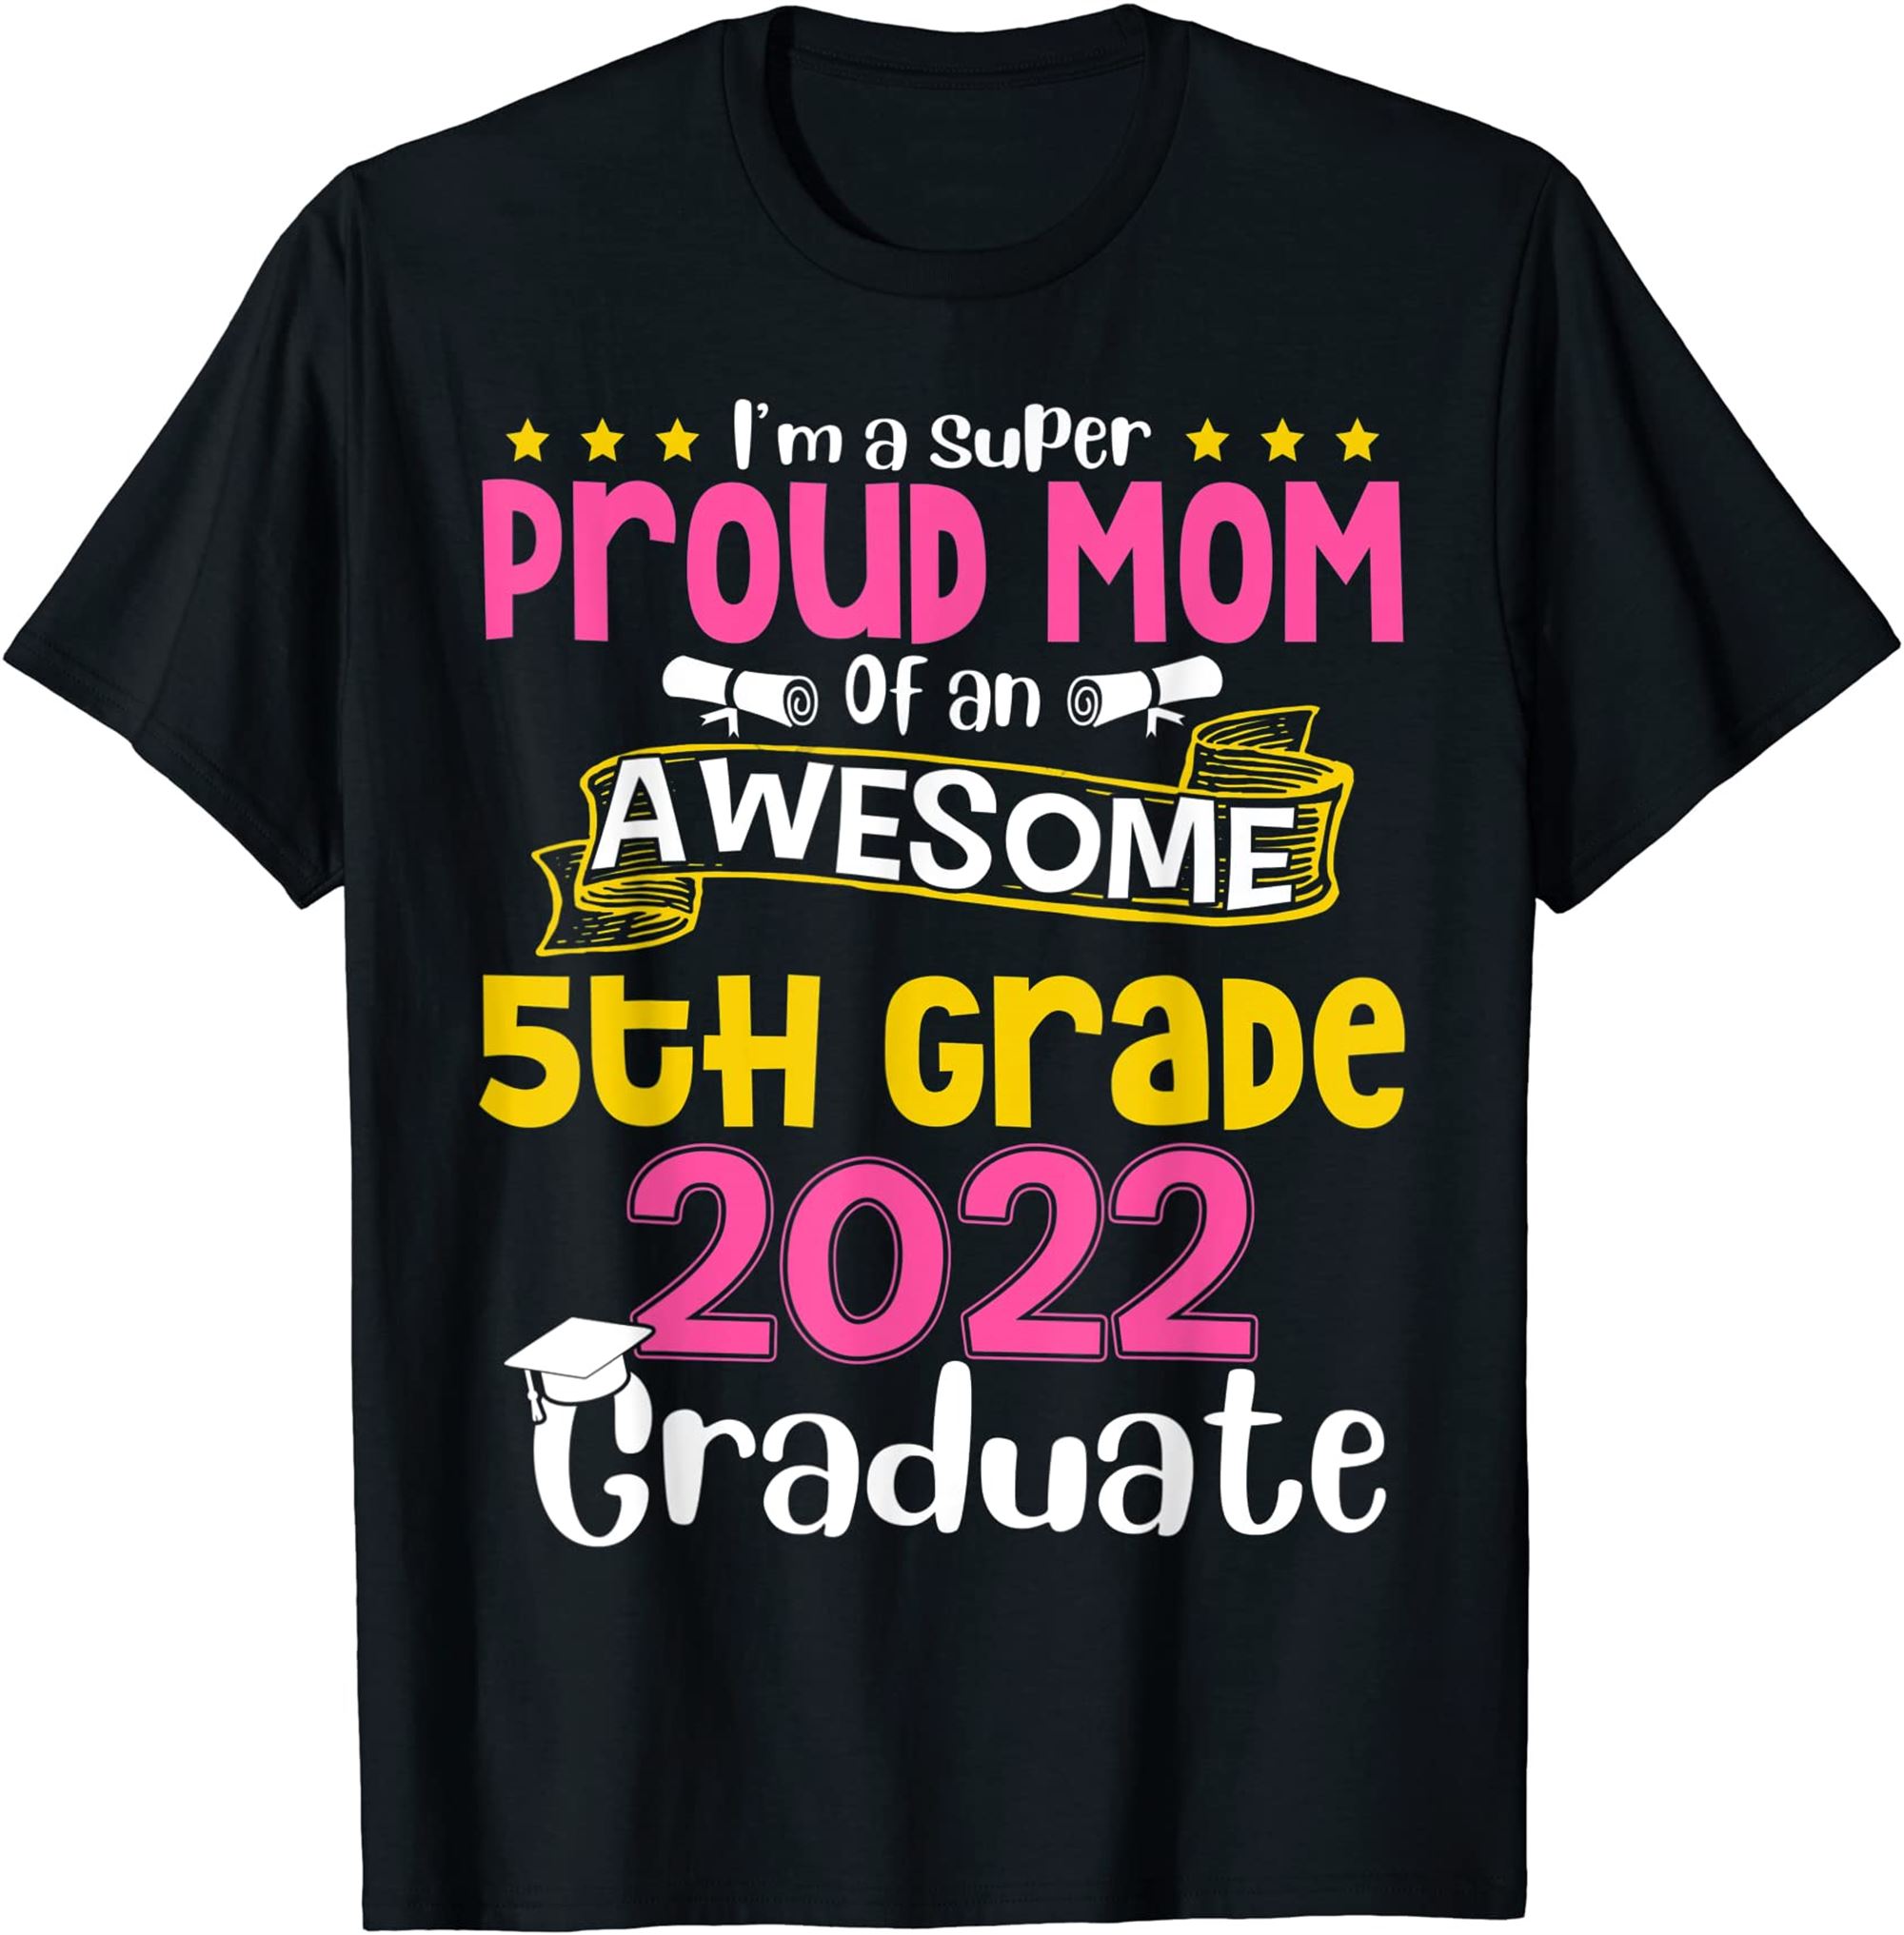 Im A Super Proud Mom Of An Awesome 5th Grade 2022 Graduate T-shirt Full Size Up To 5xl